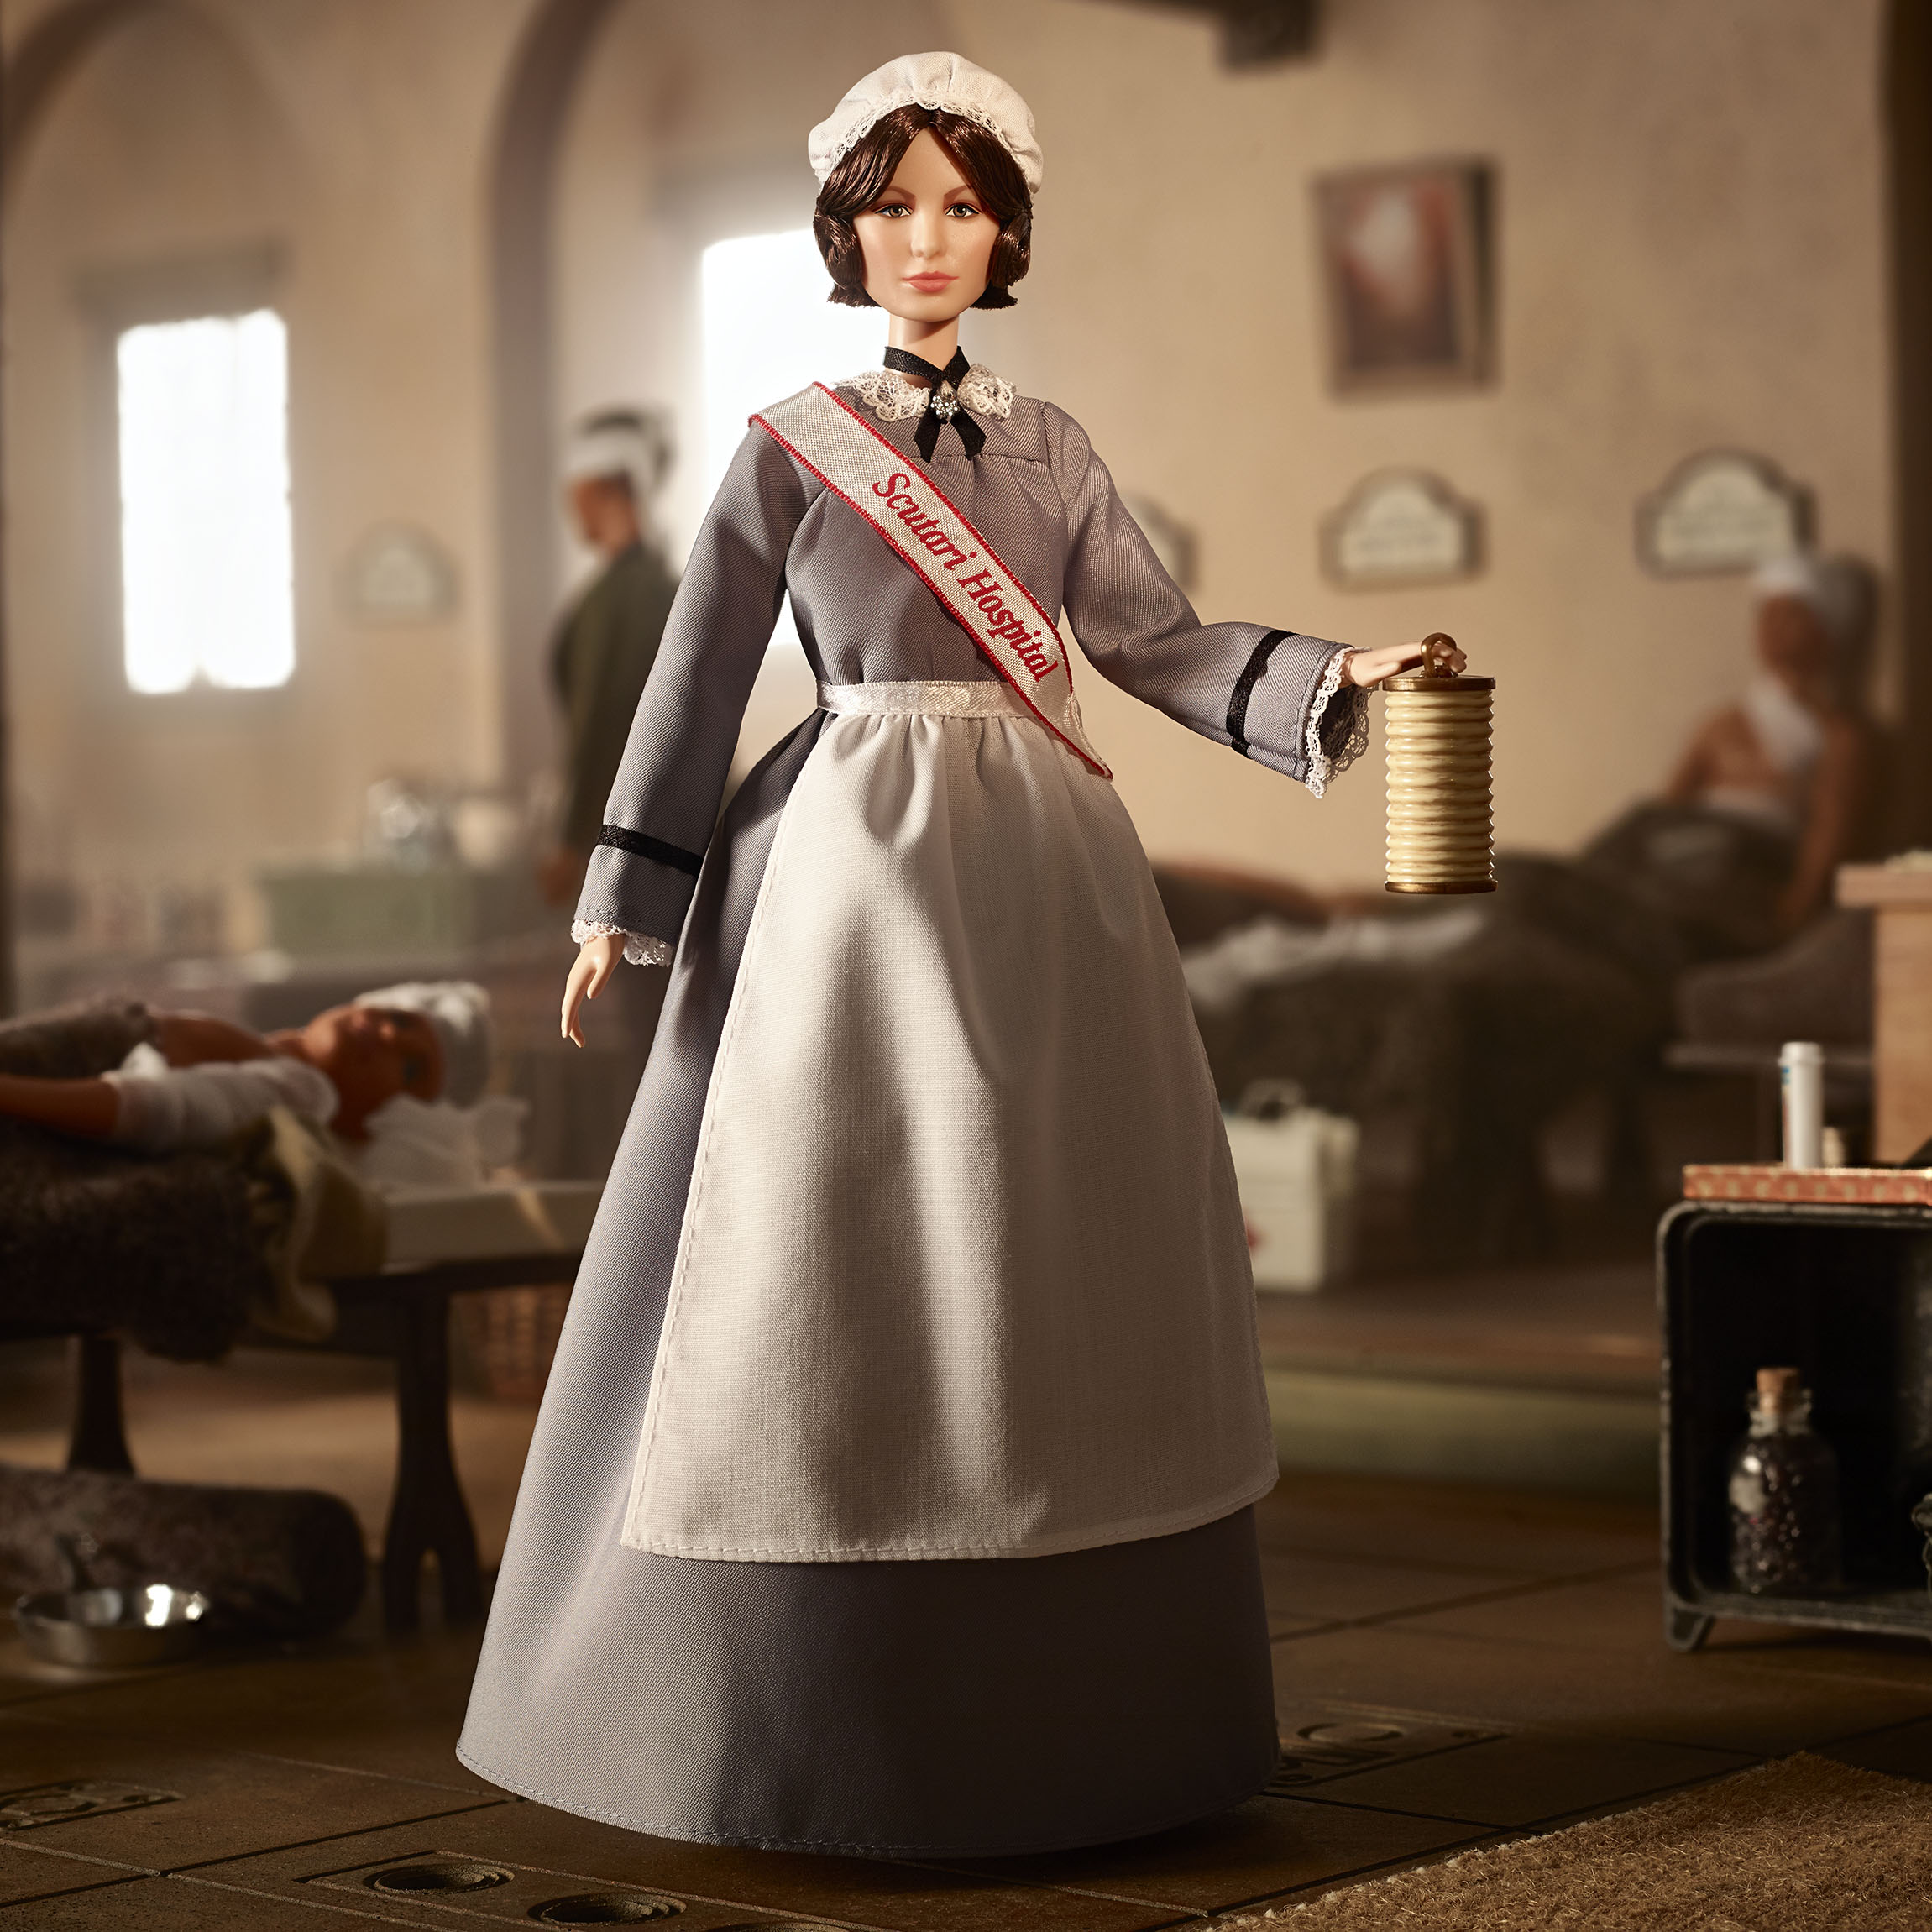 Barbie Inspiring Women Florence Nightingale Collectible Doll, Approx. 12 inch - image 3 of 7